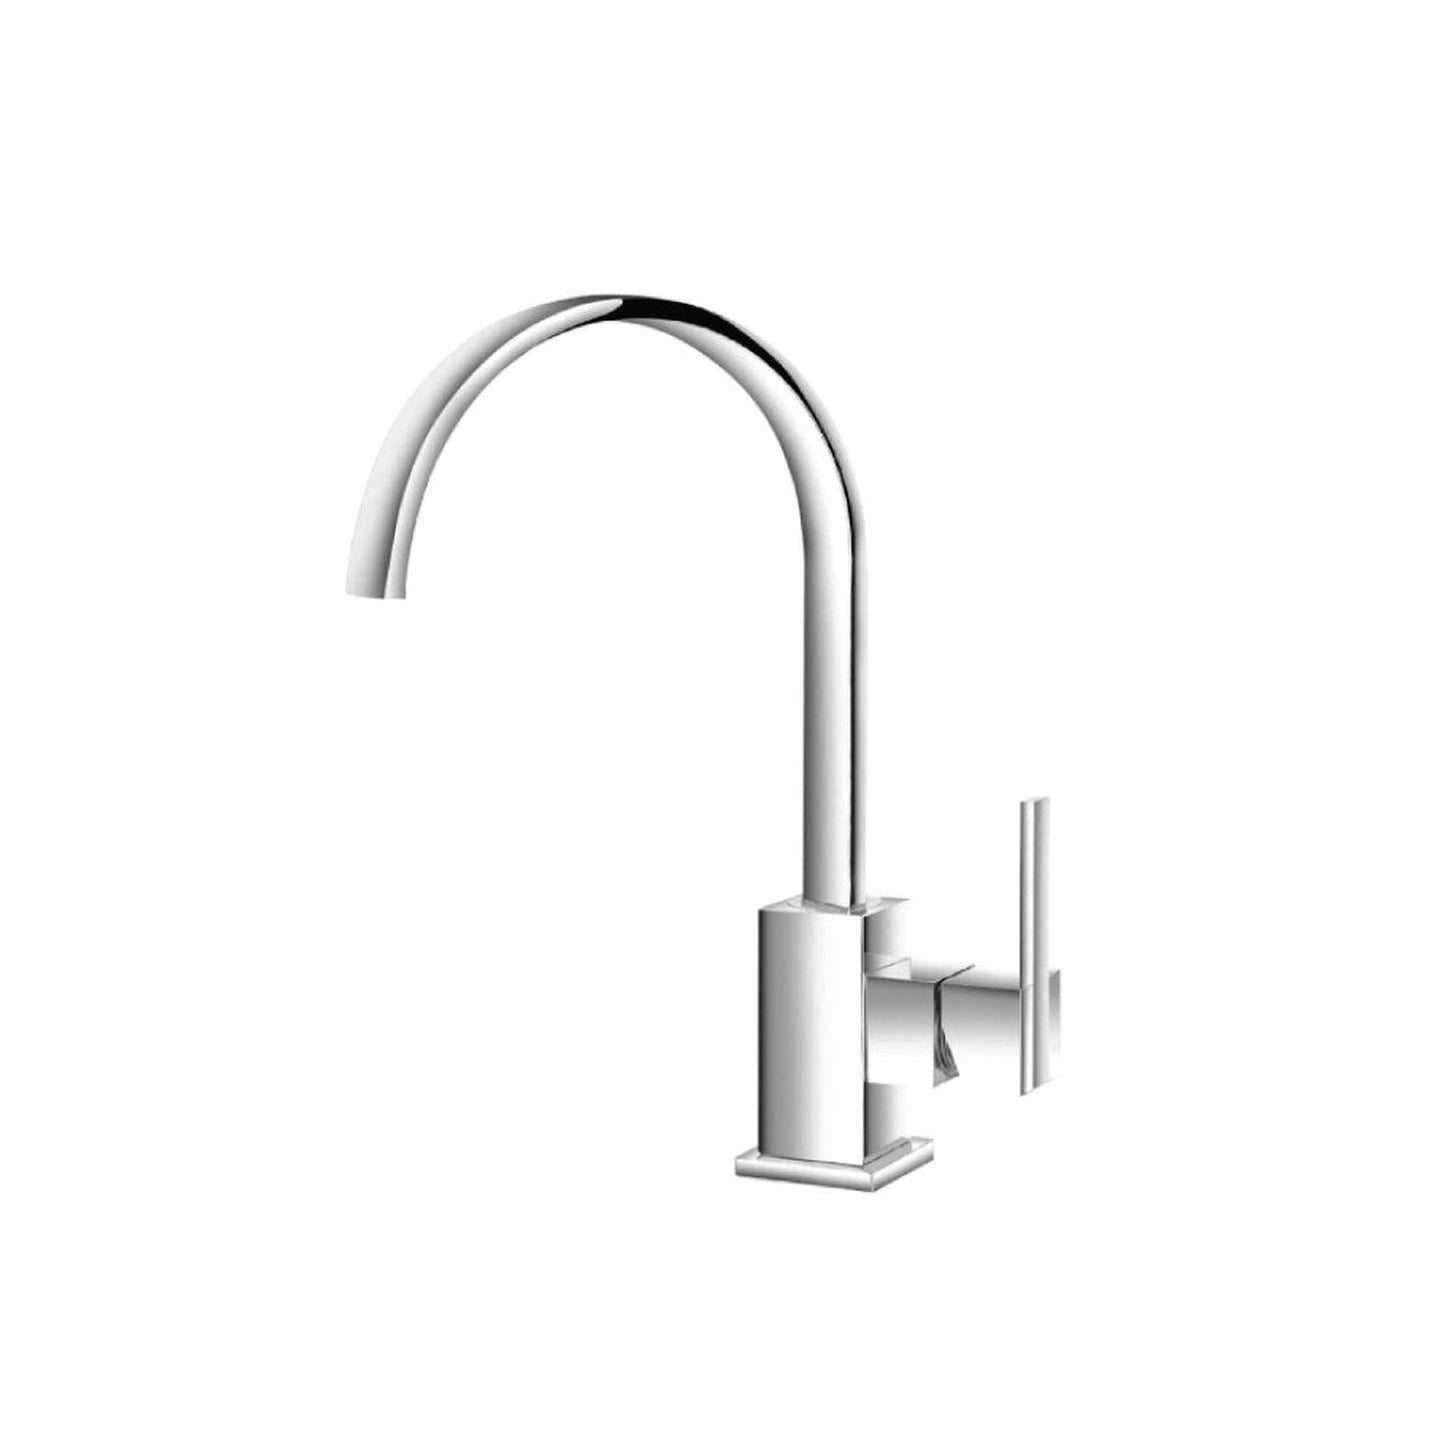 Isenberg Serie 150 10" Single-Hole Chrome Solid Brass Deck-Mounted Bathroom Bar Sink Faucet With Swivel Spout